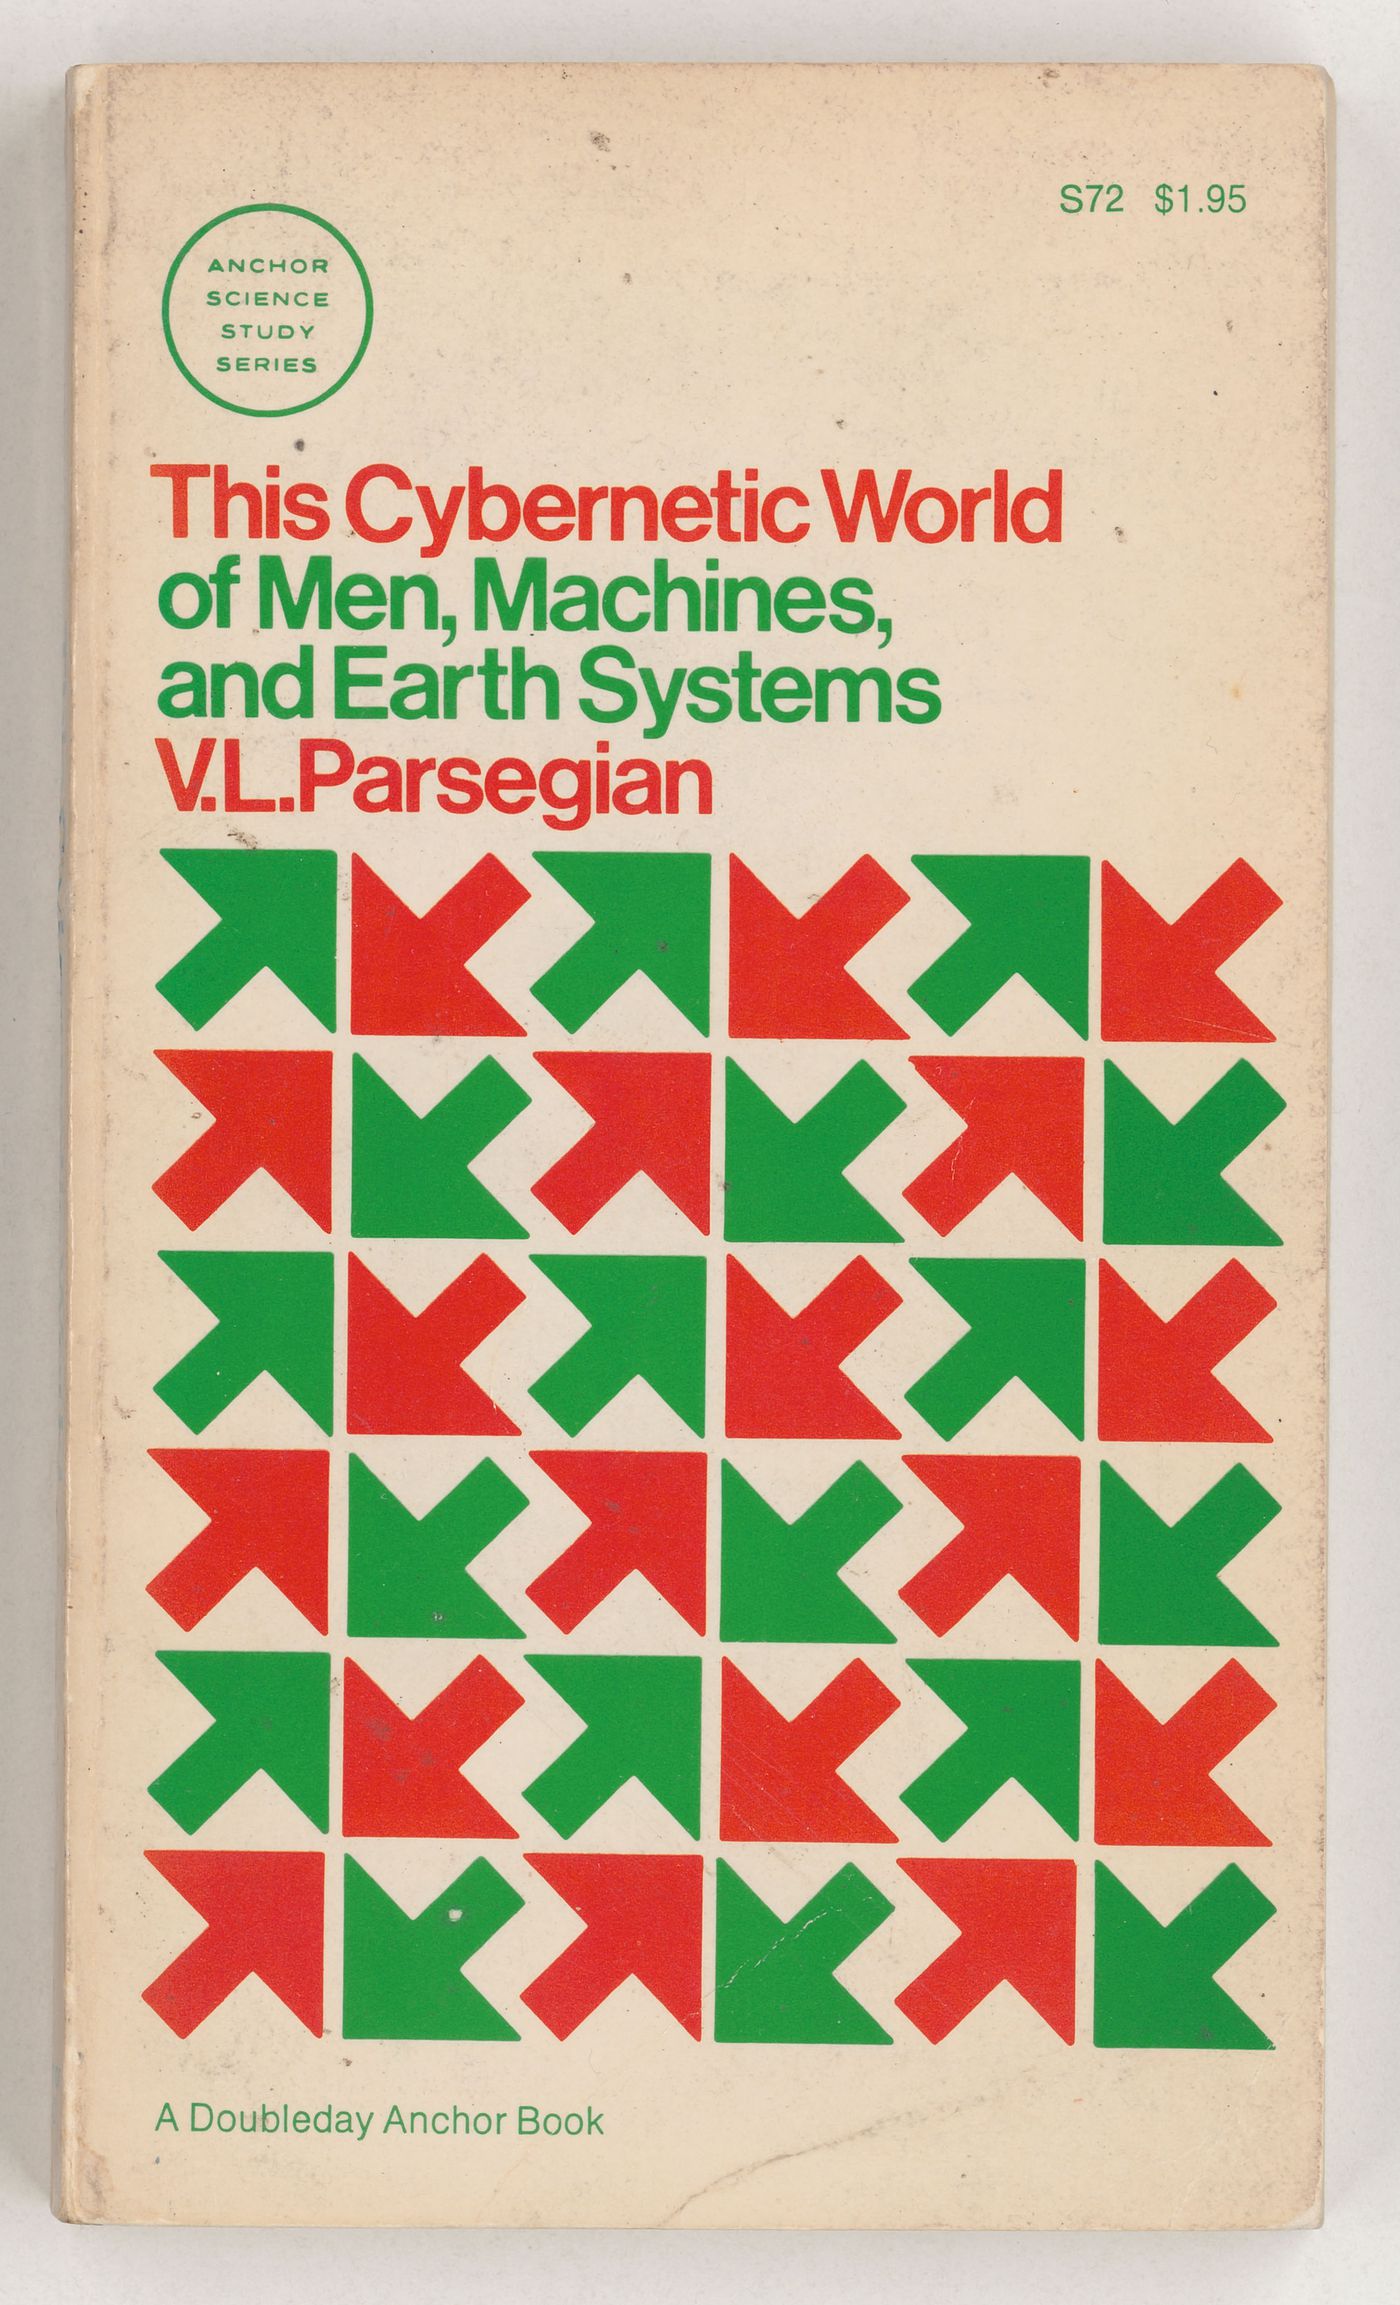 This Cybernetic World of Men, Machines, and Earth